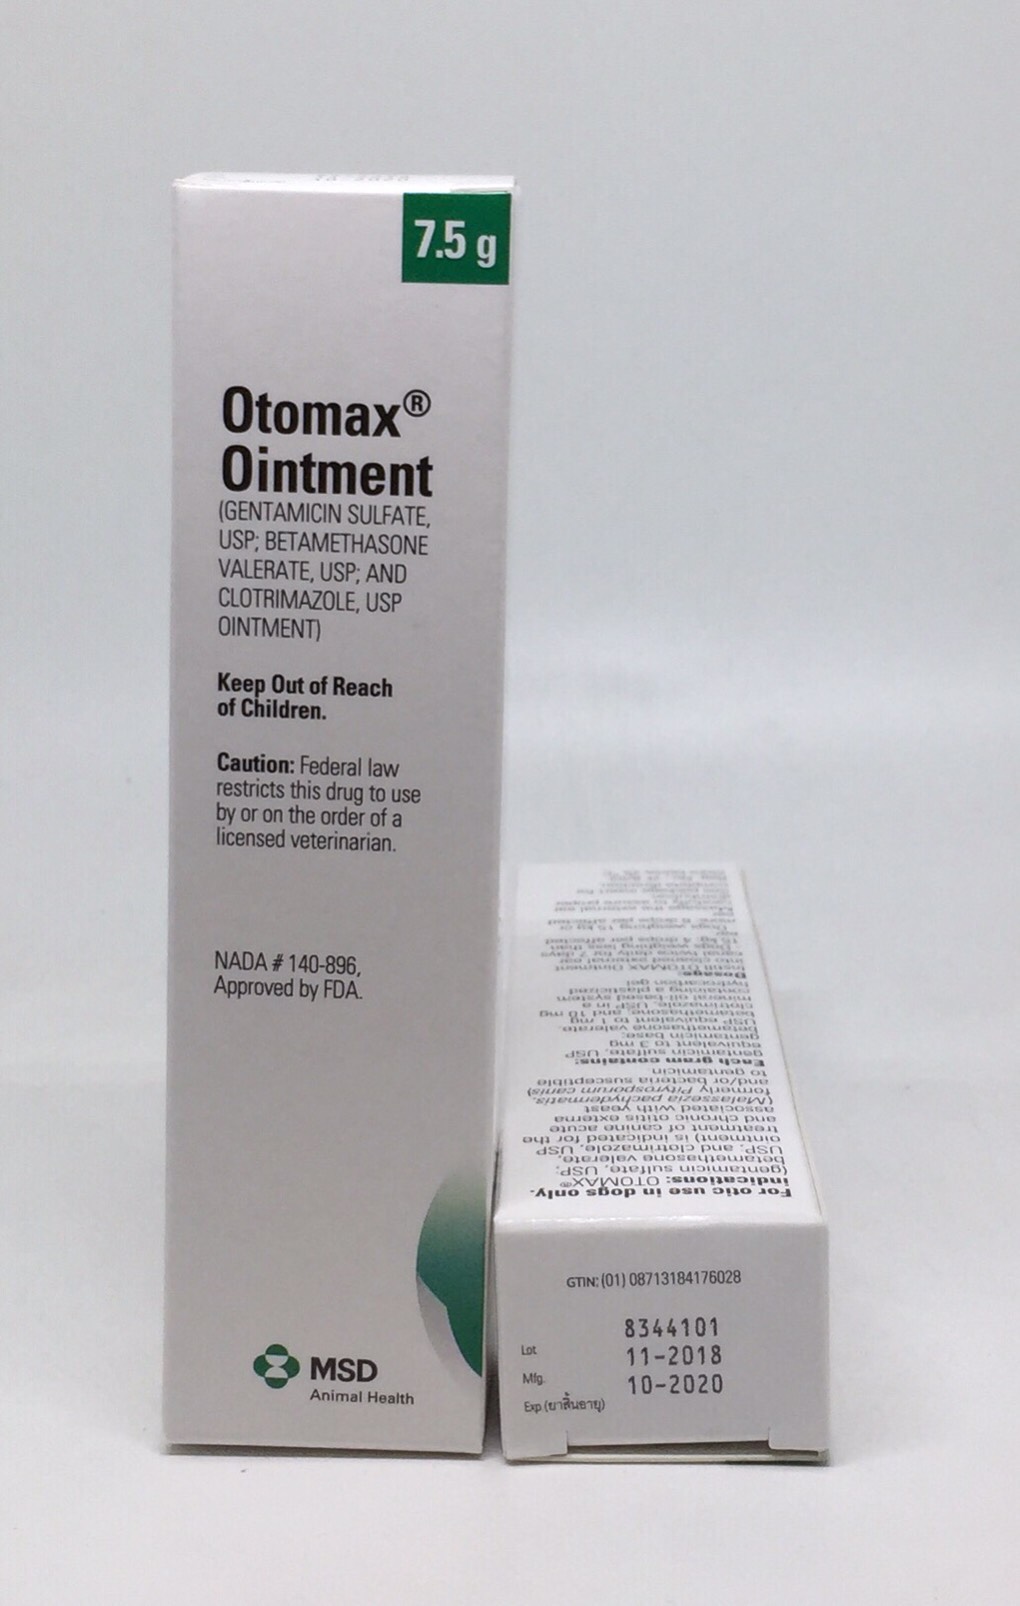 Otomax ointment for dogs treat otitis - Everything19dollar